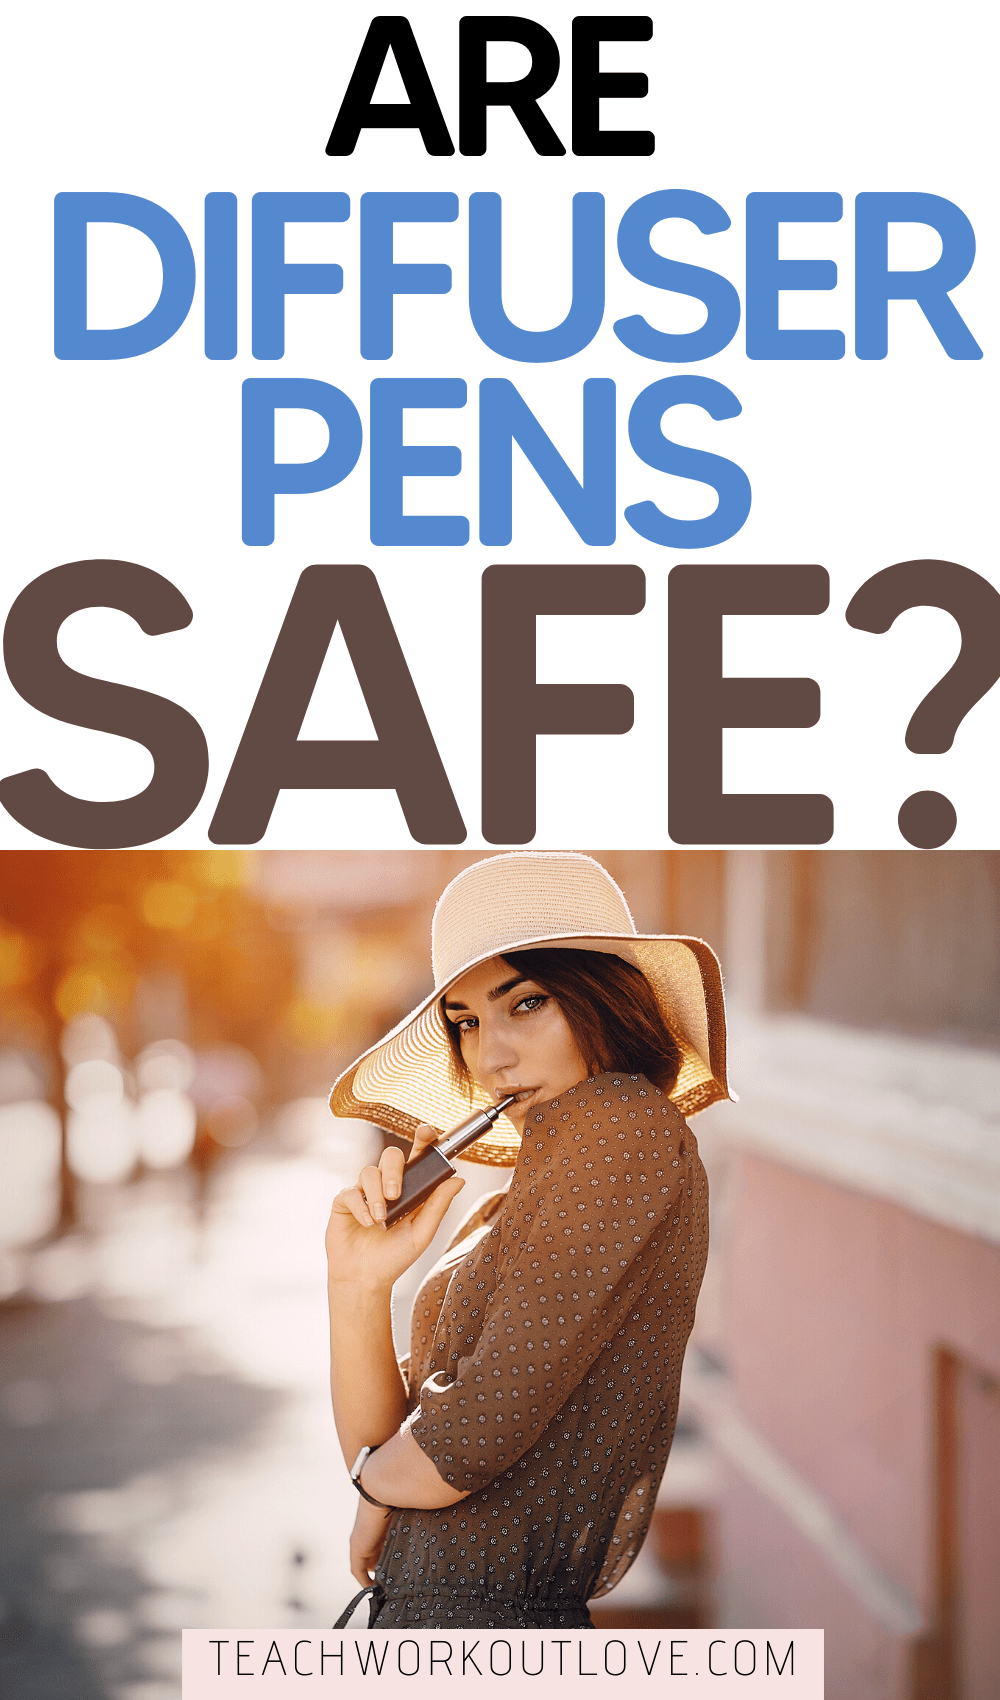 When hearing about diffuser pens, your questions might have to do with safety of this whole concept. That’s exactly the questions we're answering today.